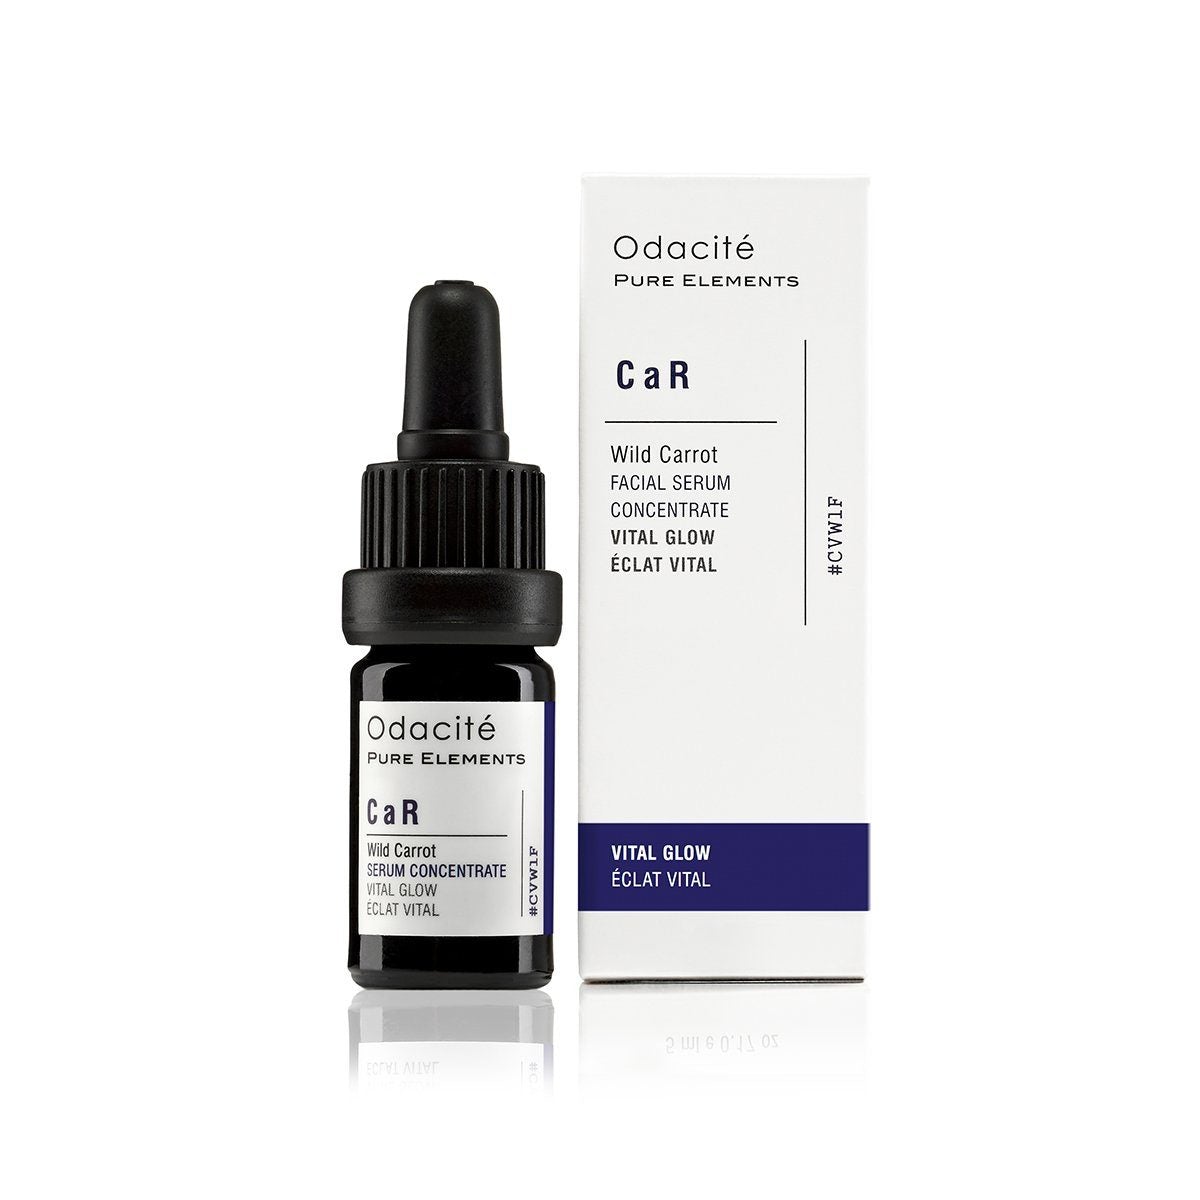 Load image into Gallery viewer, Odacité Vital Glow Wild Carrot Facial Serum Concentrate
